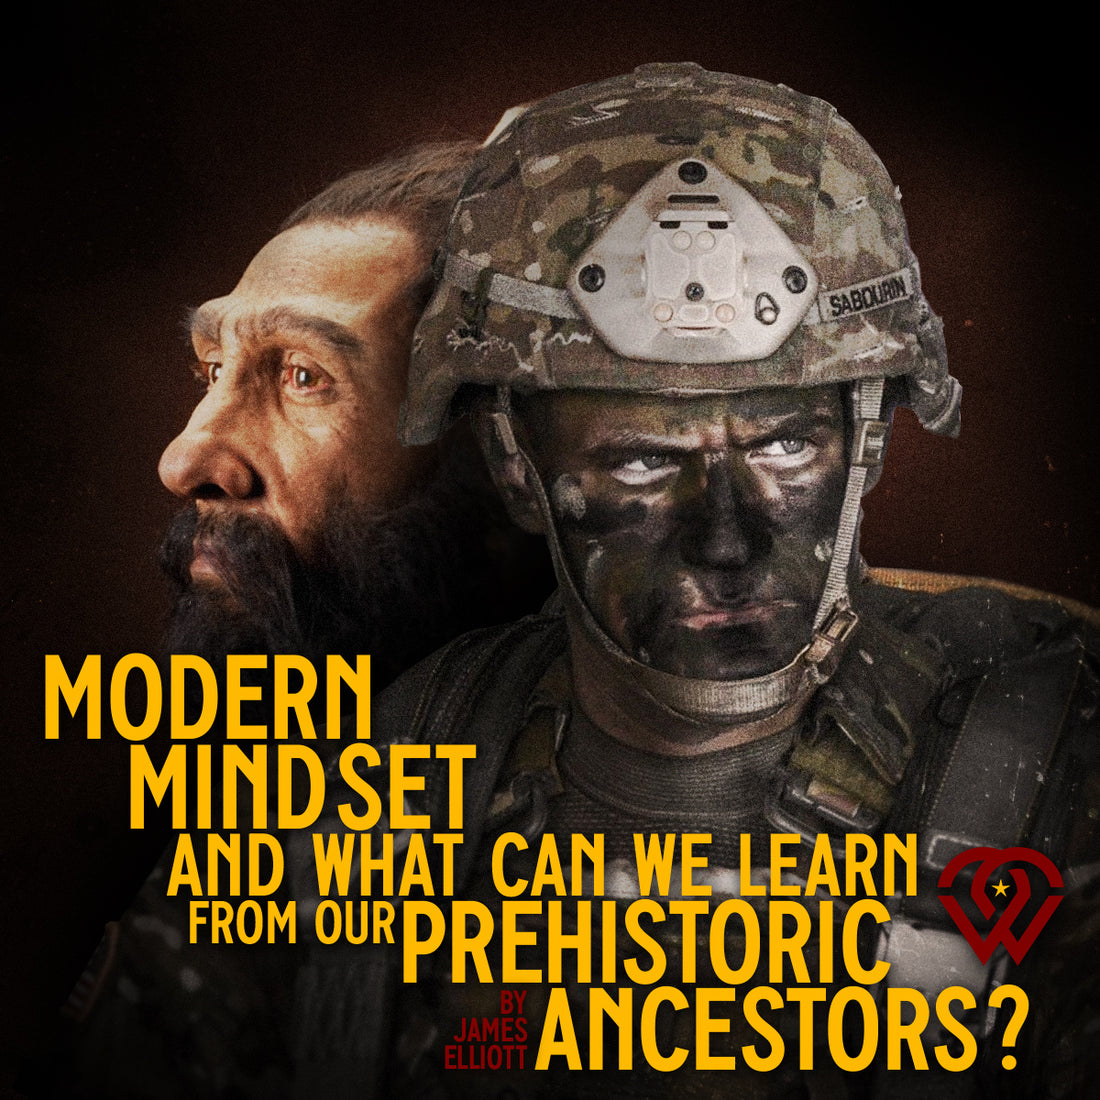 Modern mindset and what can we learn from our prehistoric ancestors